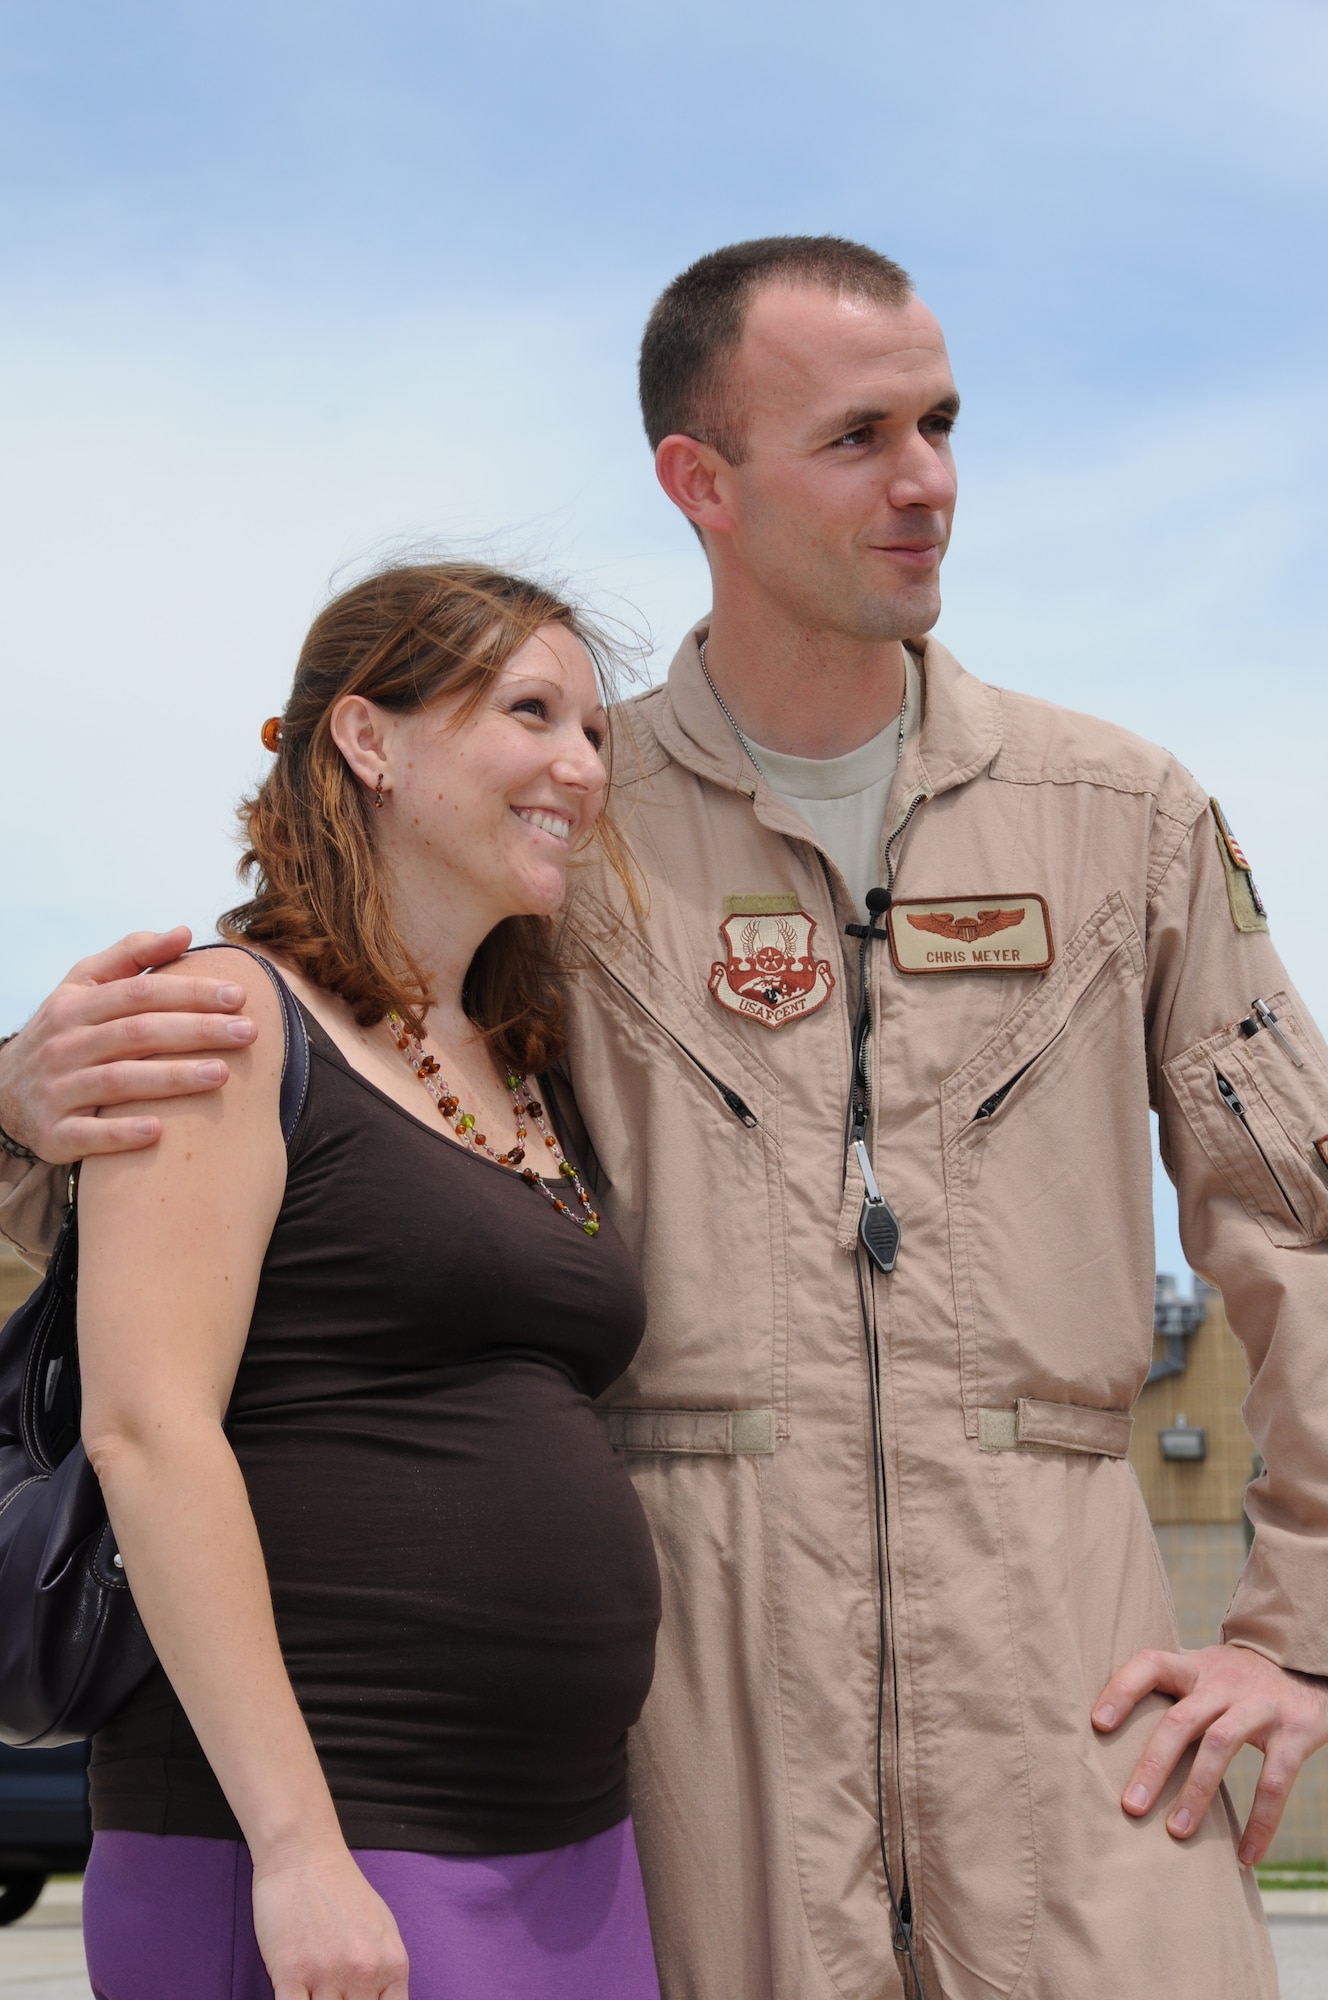 U.S. Air Force Capt. Chris Myers, a C-130J pilot with the Maryland Air National Guard, hugs his wife, Holly, on the flightline on Warfield Air National Guard Base, Baltimore, Md., May 15, 2010.  Captain Myers supported forces fighting in Afghanistan through transporting of supplies and cargo.  (U.S. Air Force photo by Staff Sgt. Benjamin Hughes/Released) 